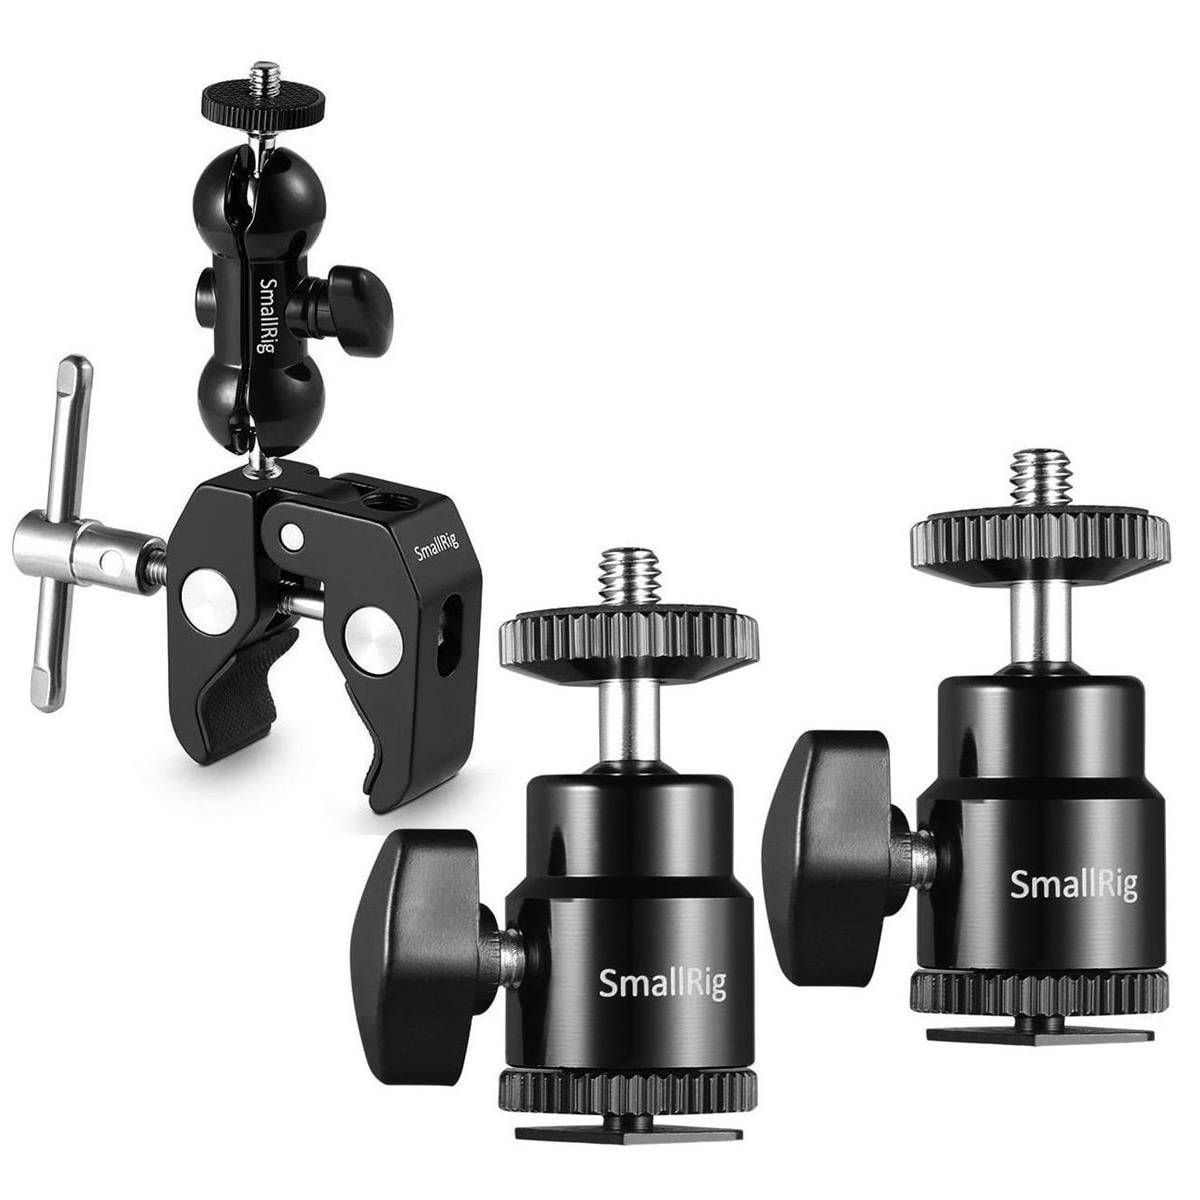 2pcs Pack 2059 SmallRig 1/4" Camera Hot shoe Mount with Additional 1/4" Screw 